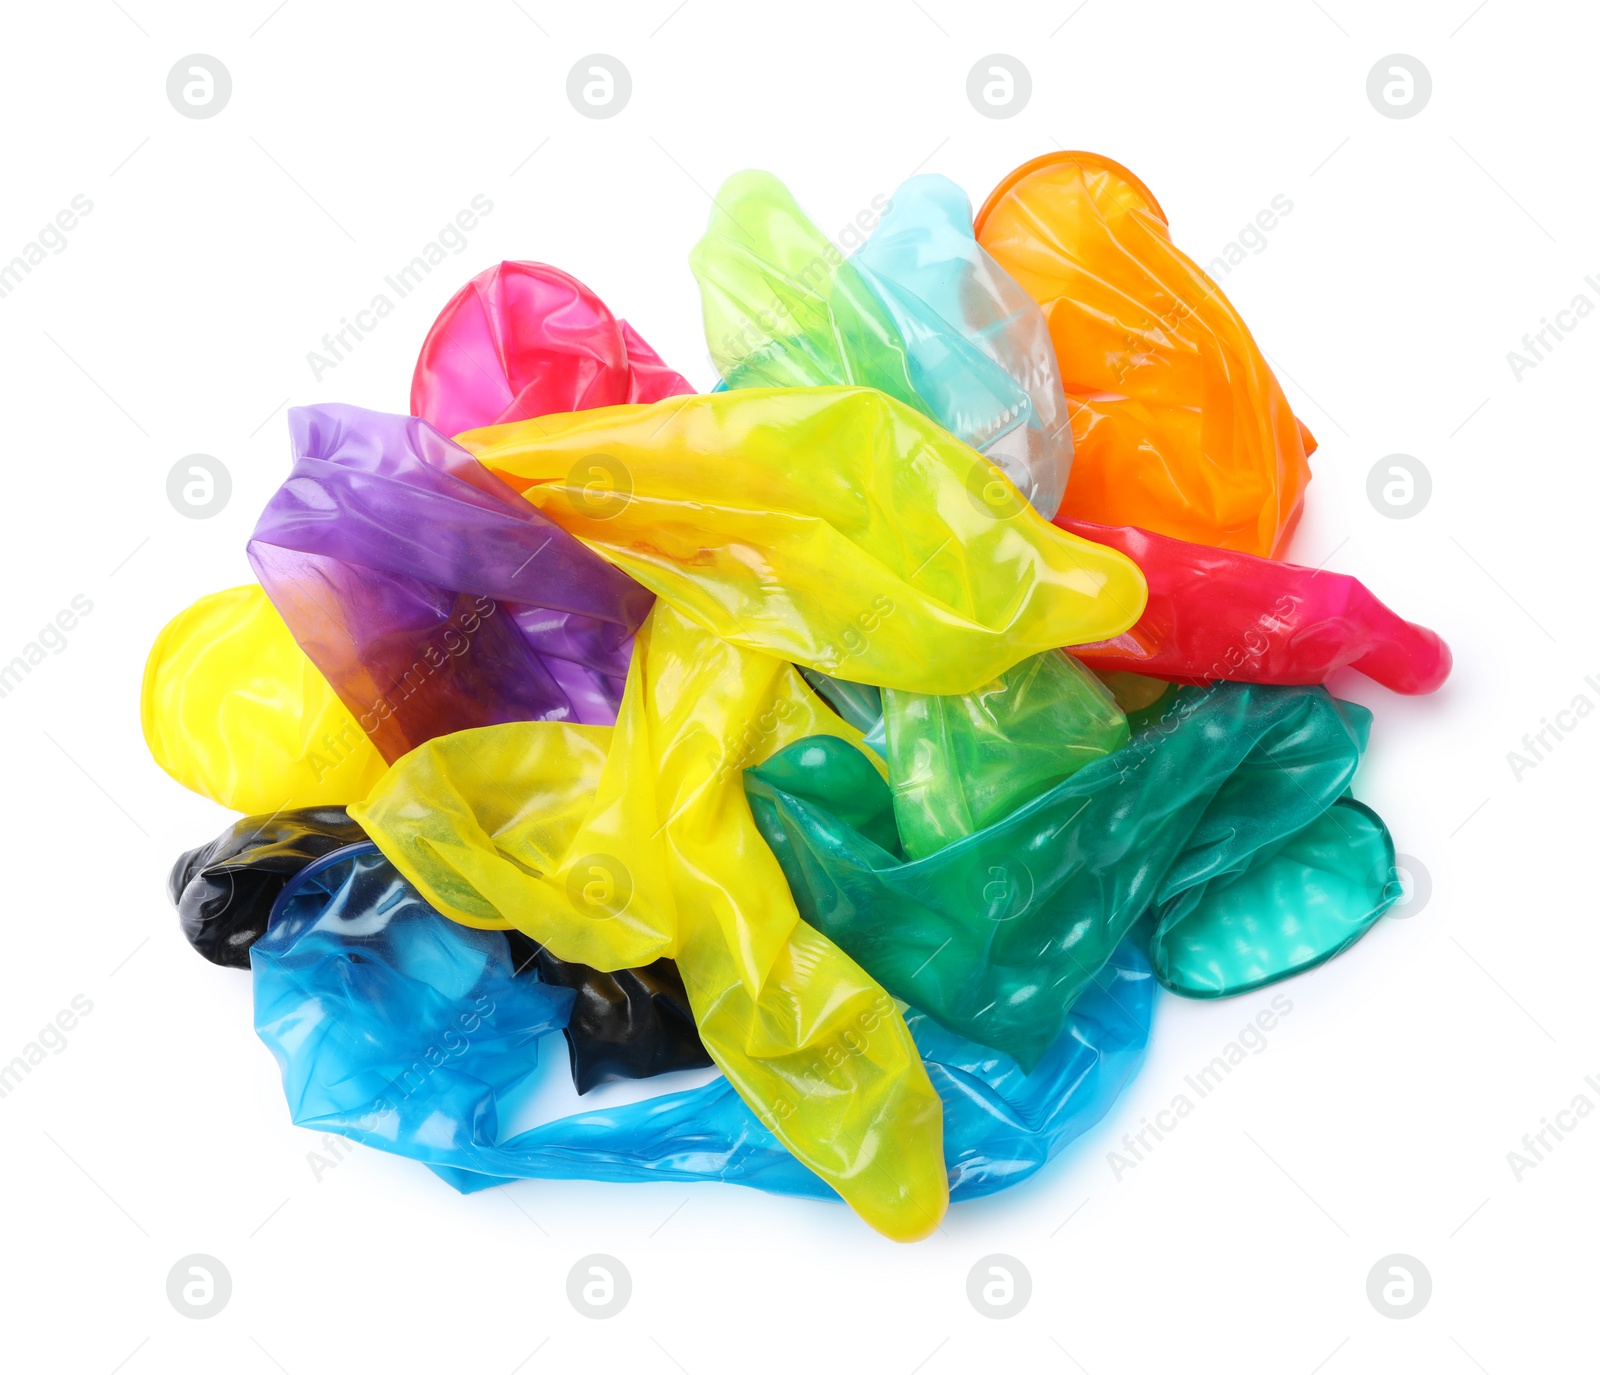 Image of Pile of unrolled bright condoms on white background, top view. Safe sex